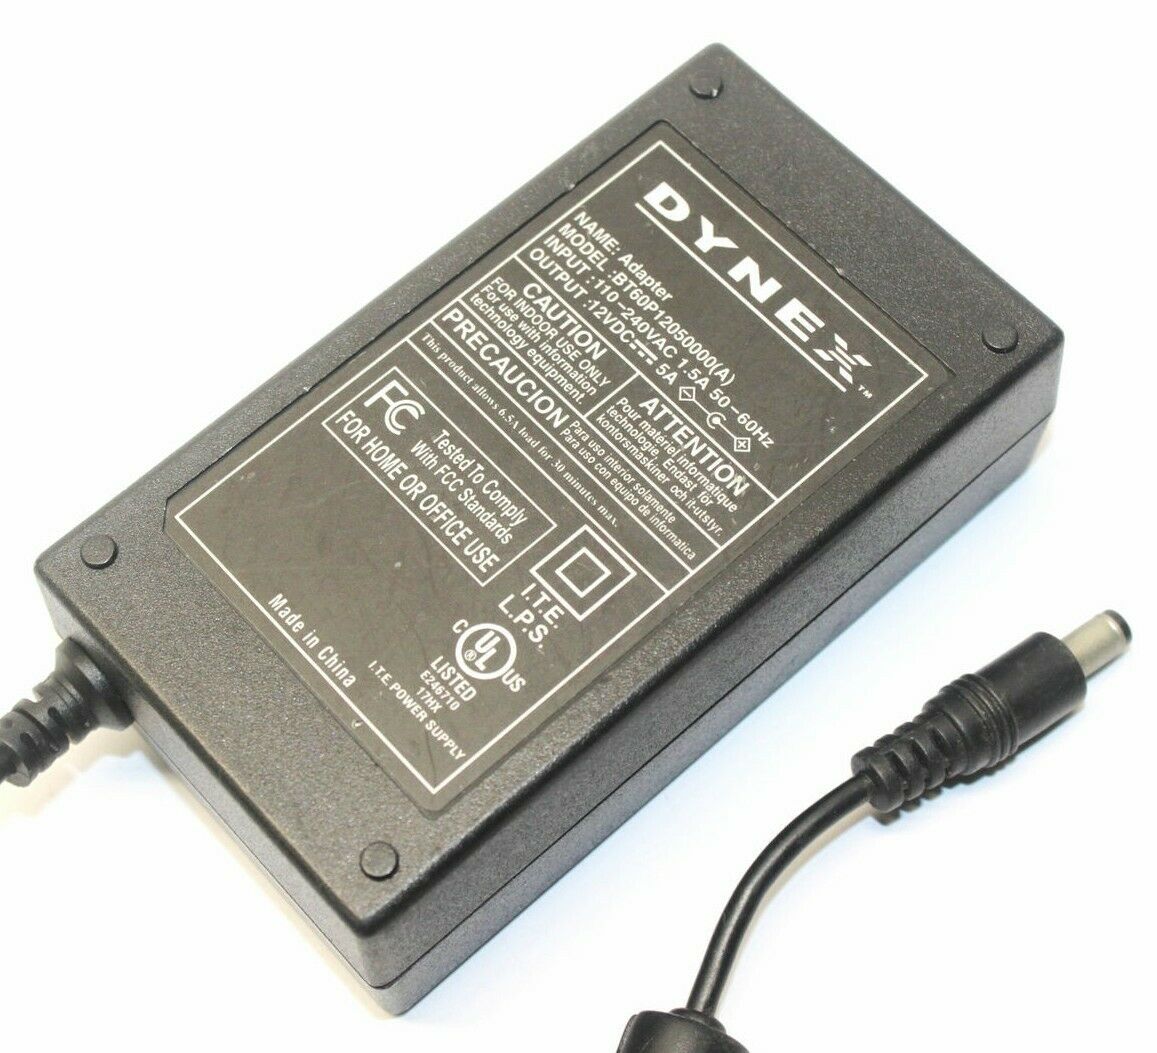 Genuine Dynex BT60P12050000(A) ITE Power Supply AC Adapter Output DC 12V 5A Brand: Dynex Type: Adapter MPN: Does